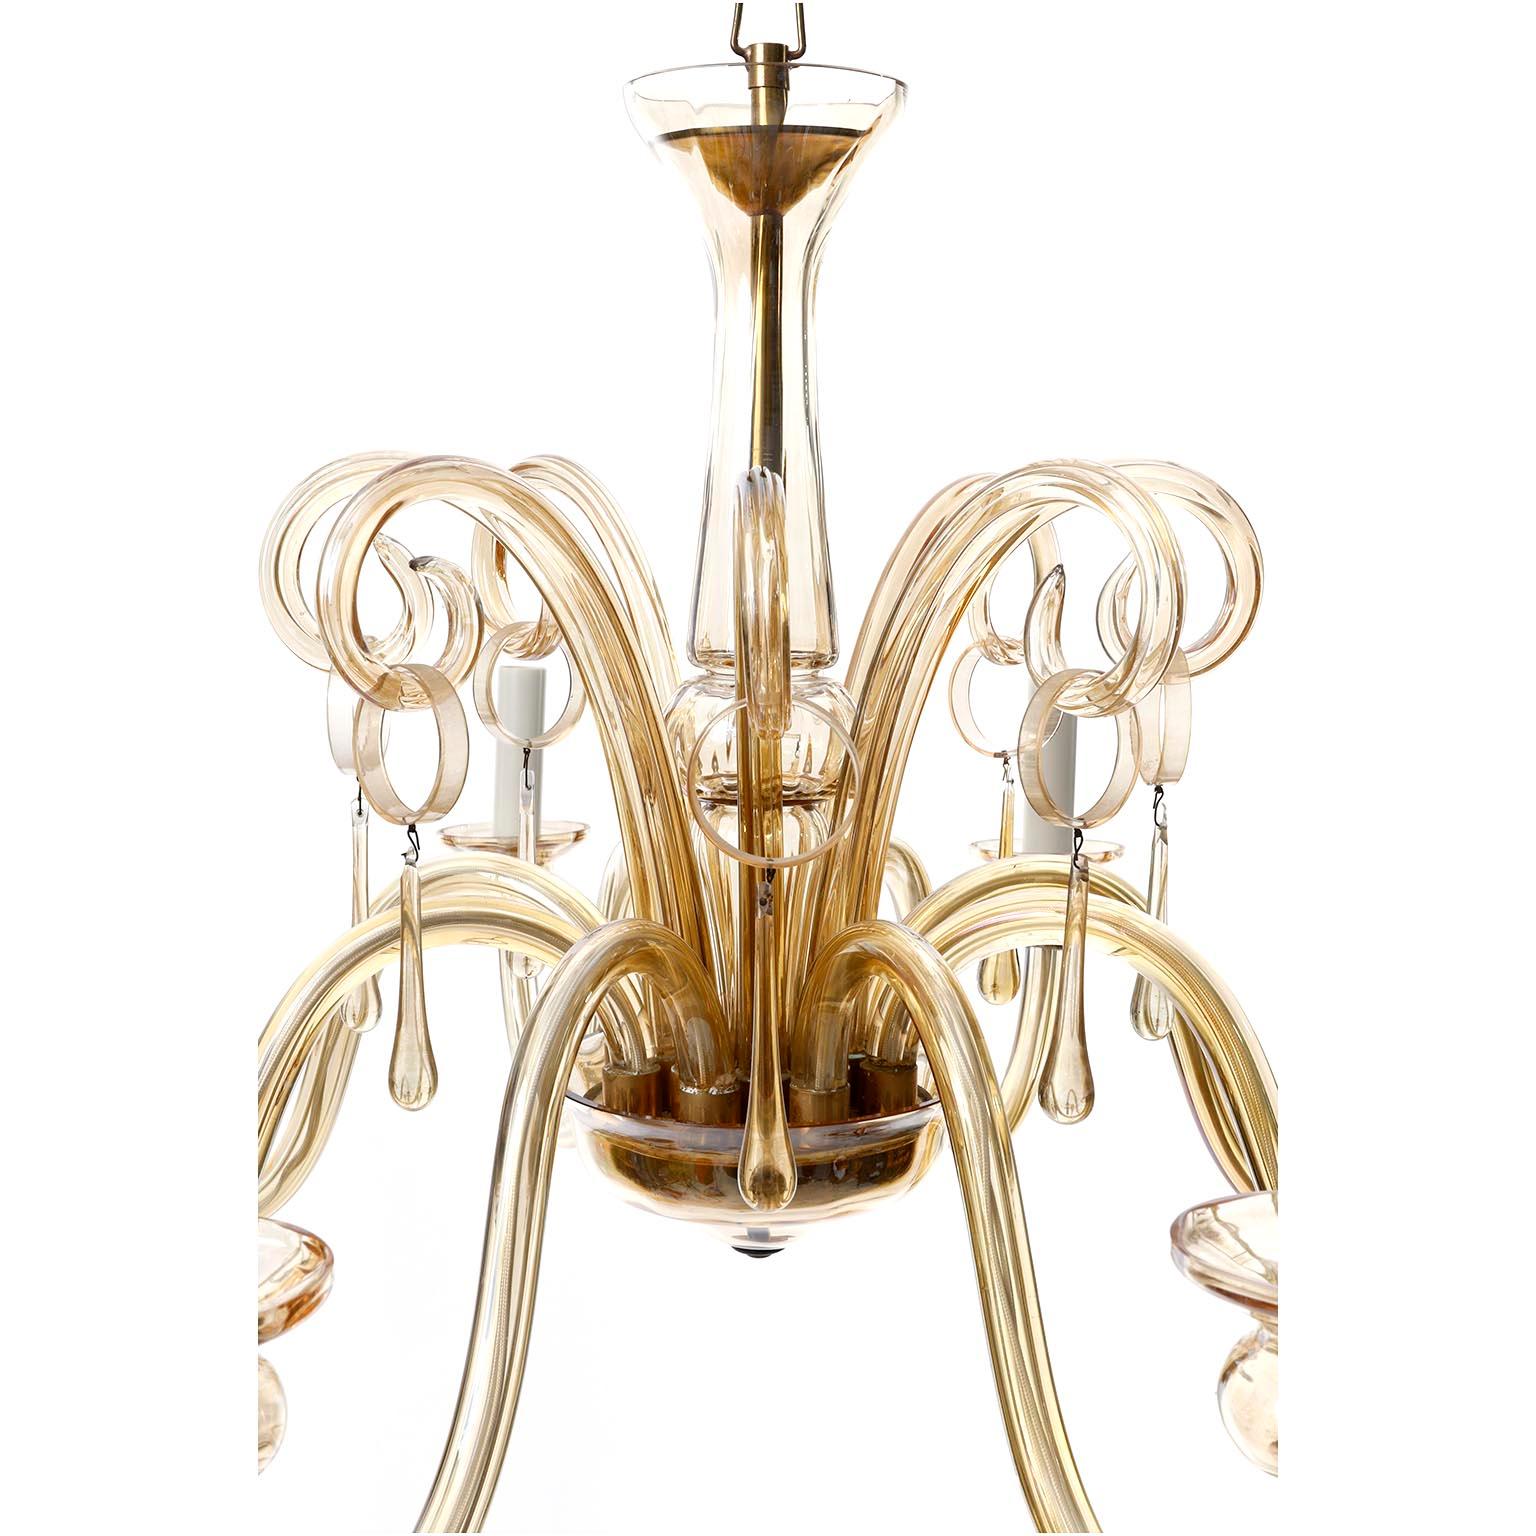 Mid-Century Modern Amber Tone Murano Glass Chandelier, Eight Arms, 1960s For Sale 2